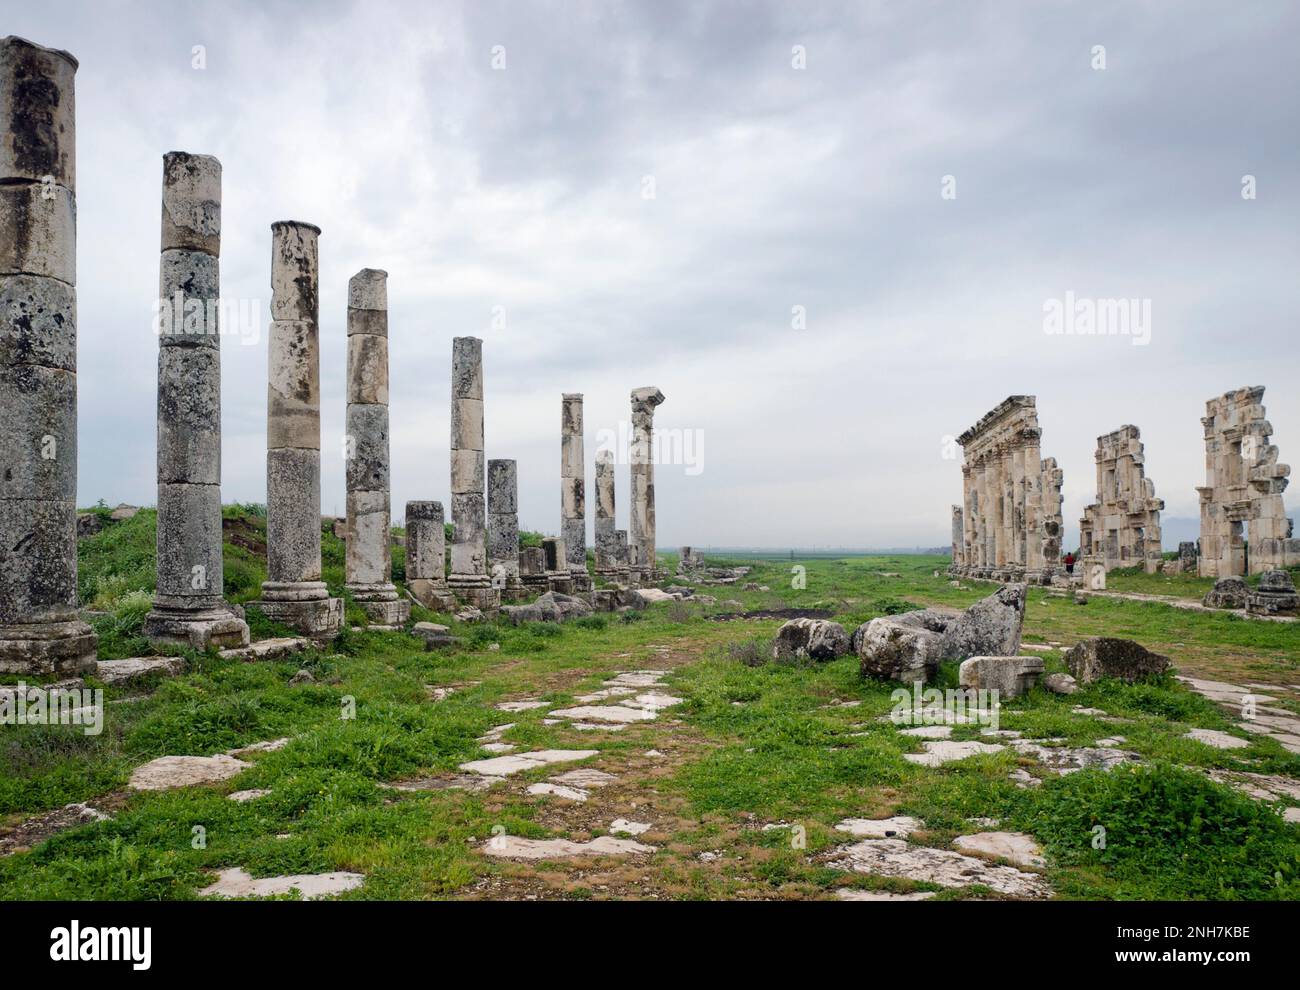 The Great Colonnade at Apamea  ancient roman ruins, Hama Governorate, Syria Stock Photo